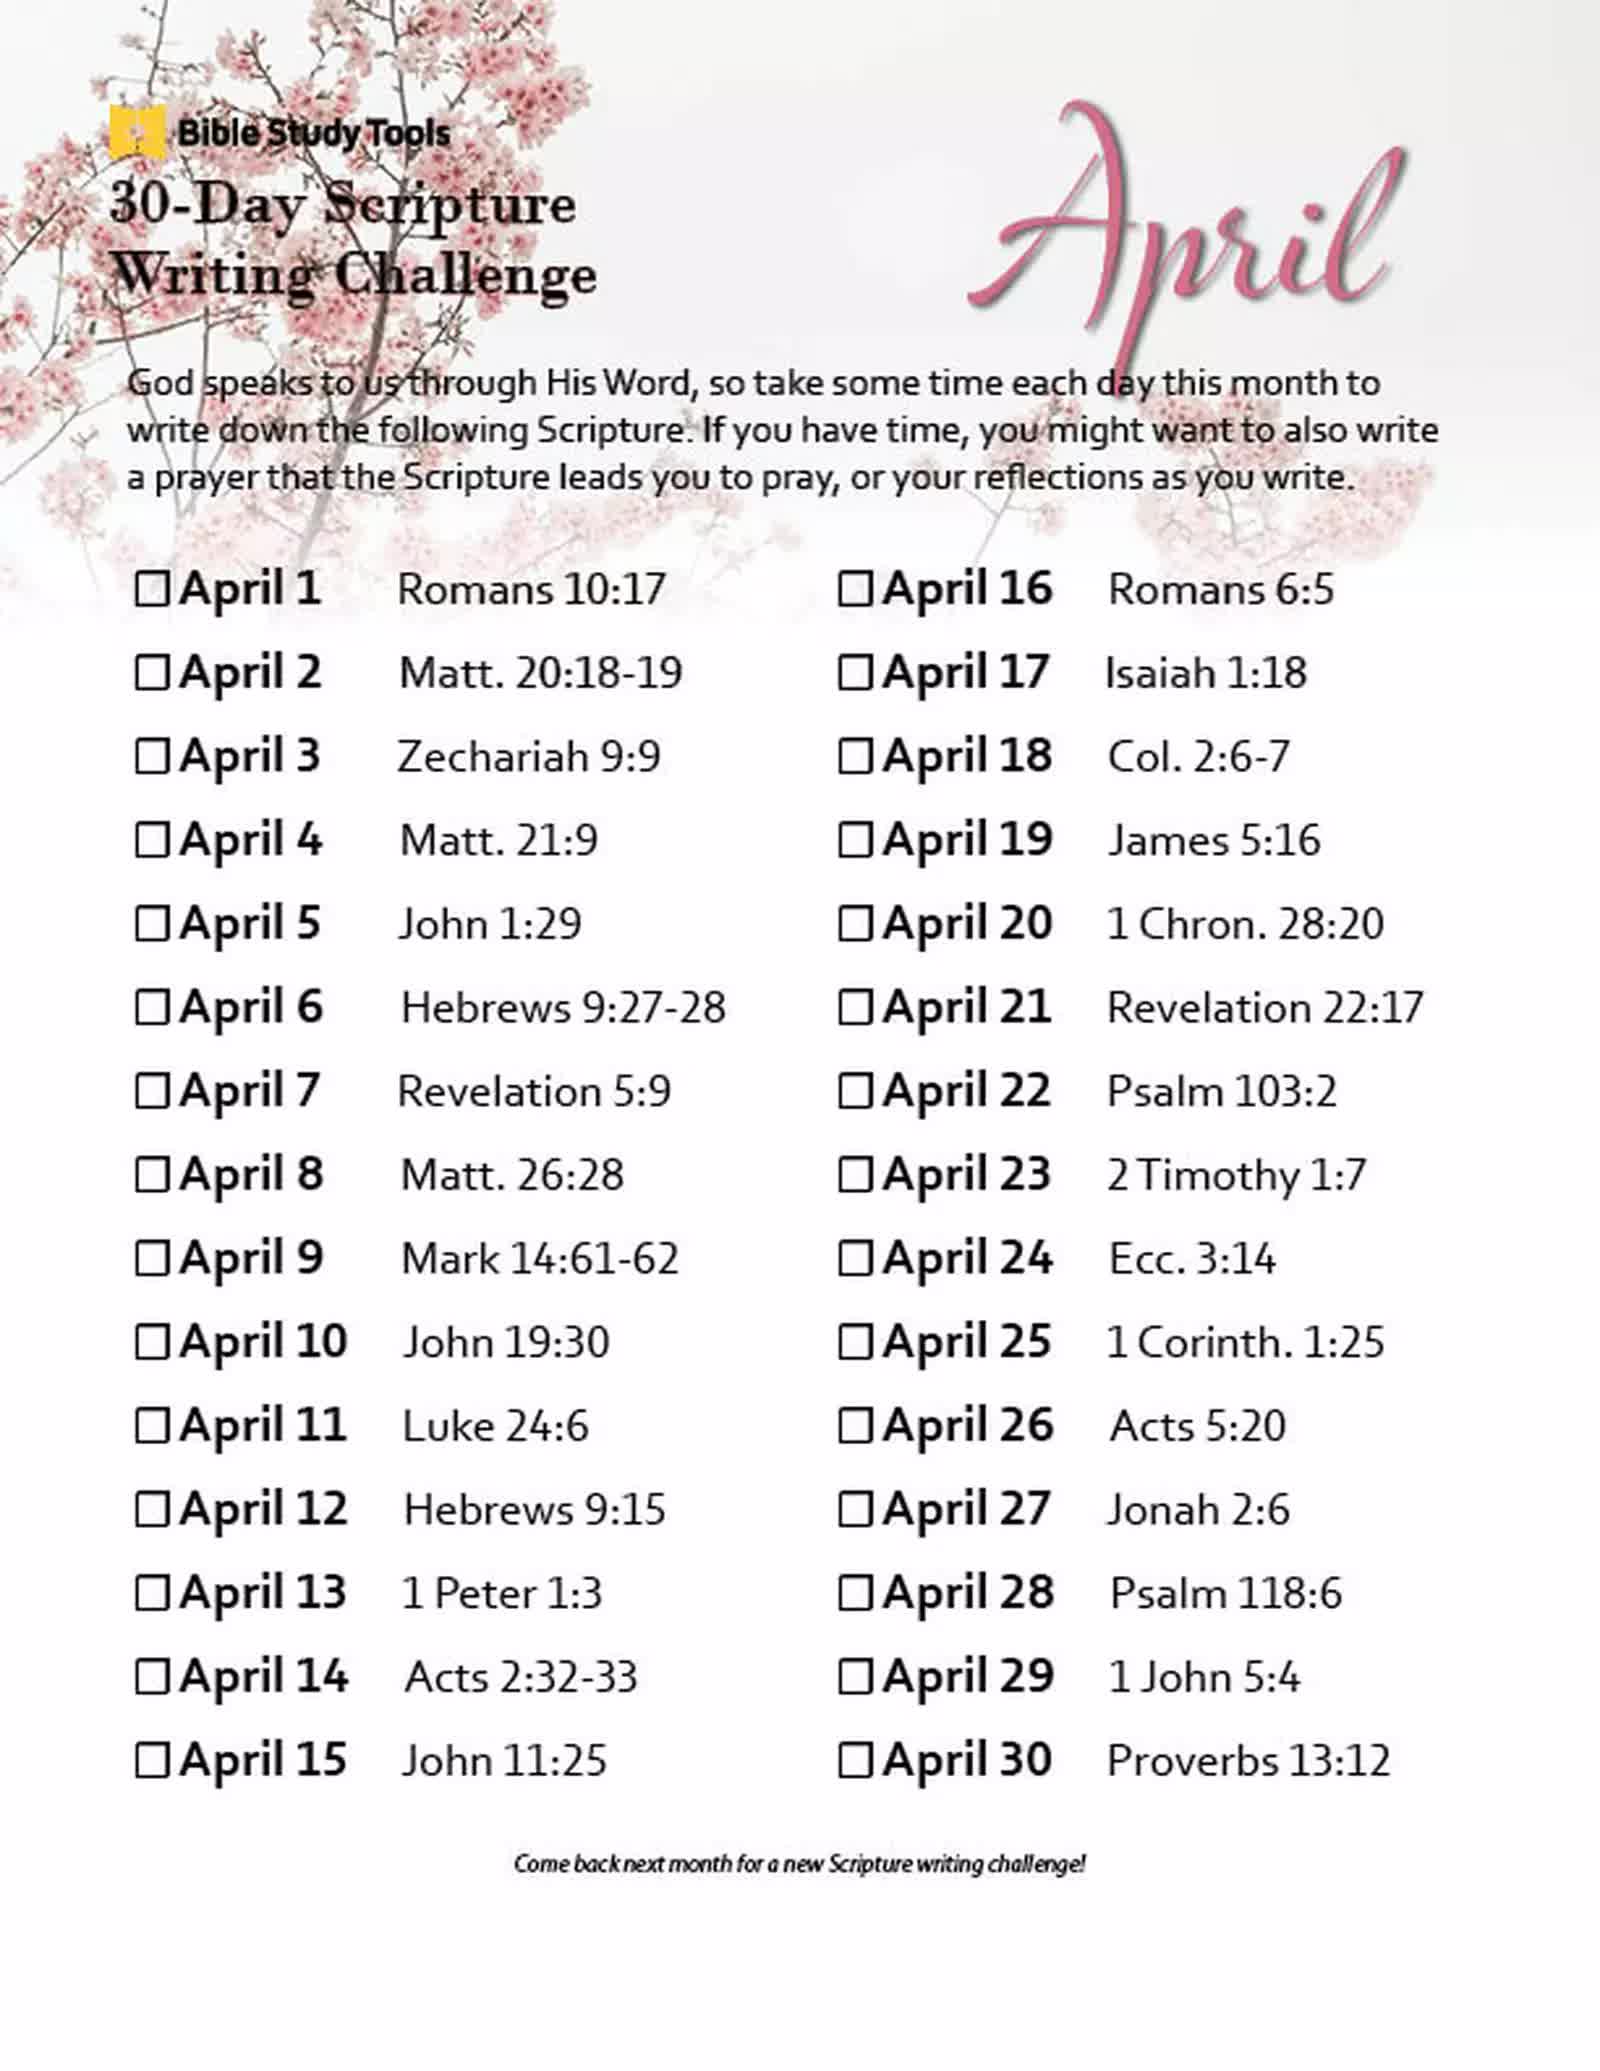 April's 30-Day Scripture Writing Challenge - Inside BST